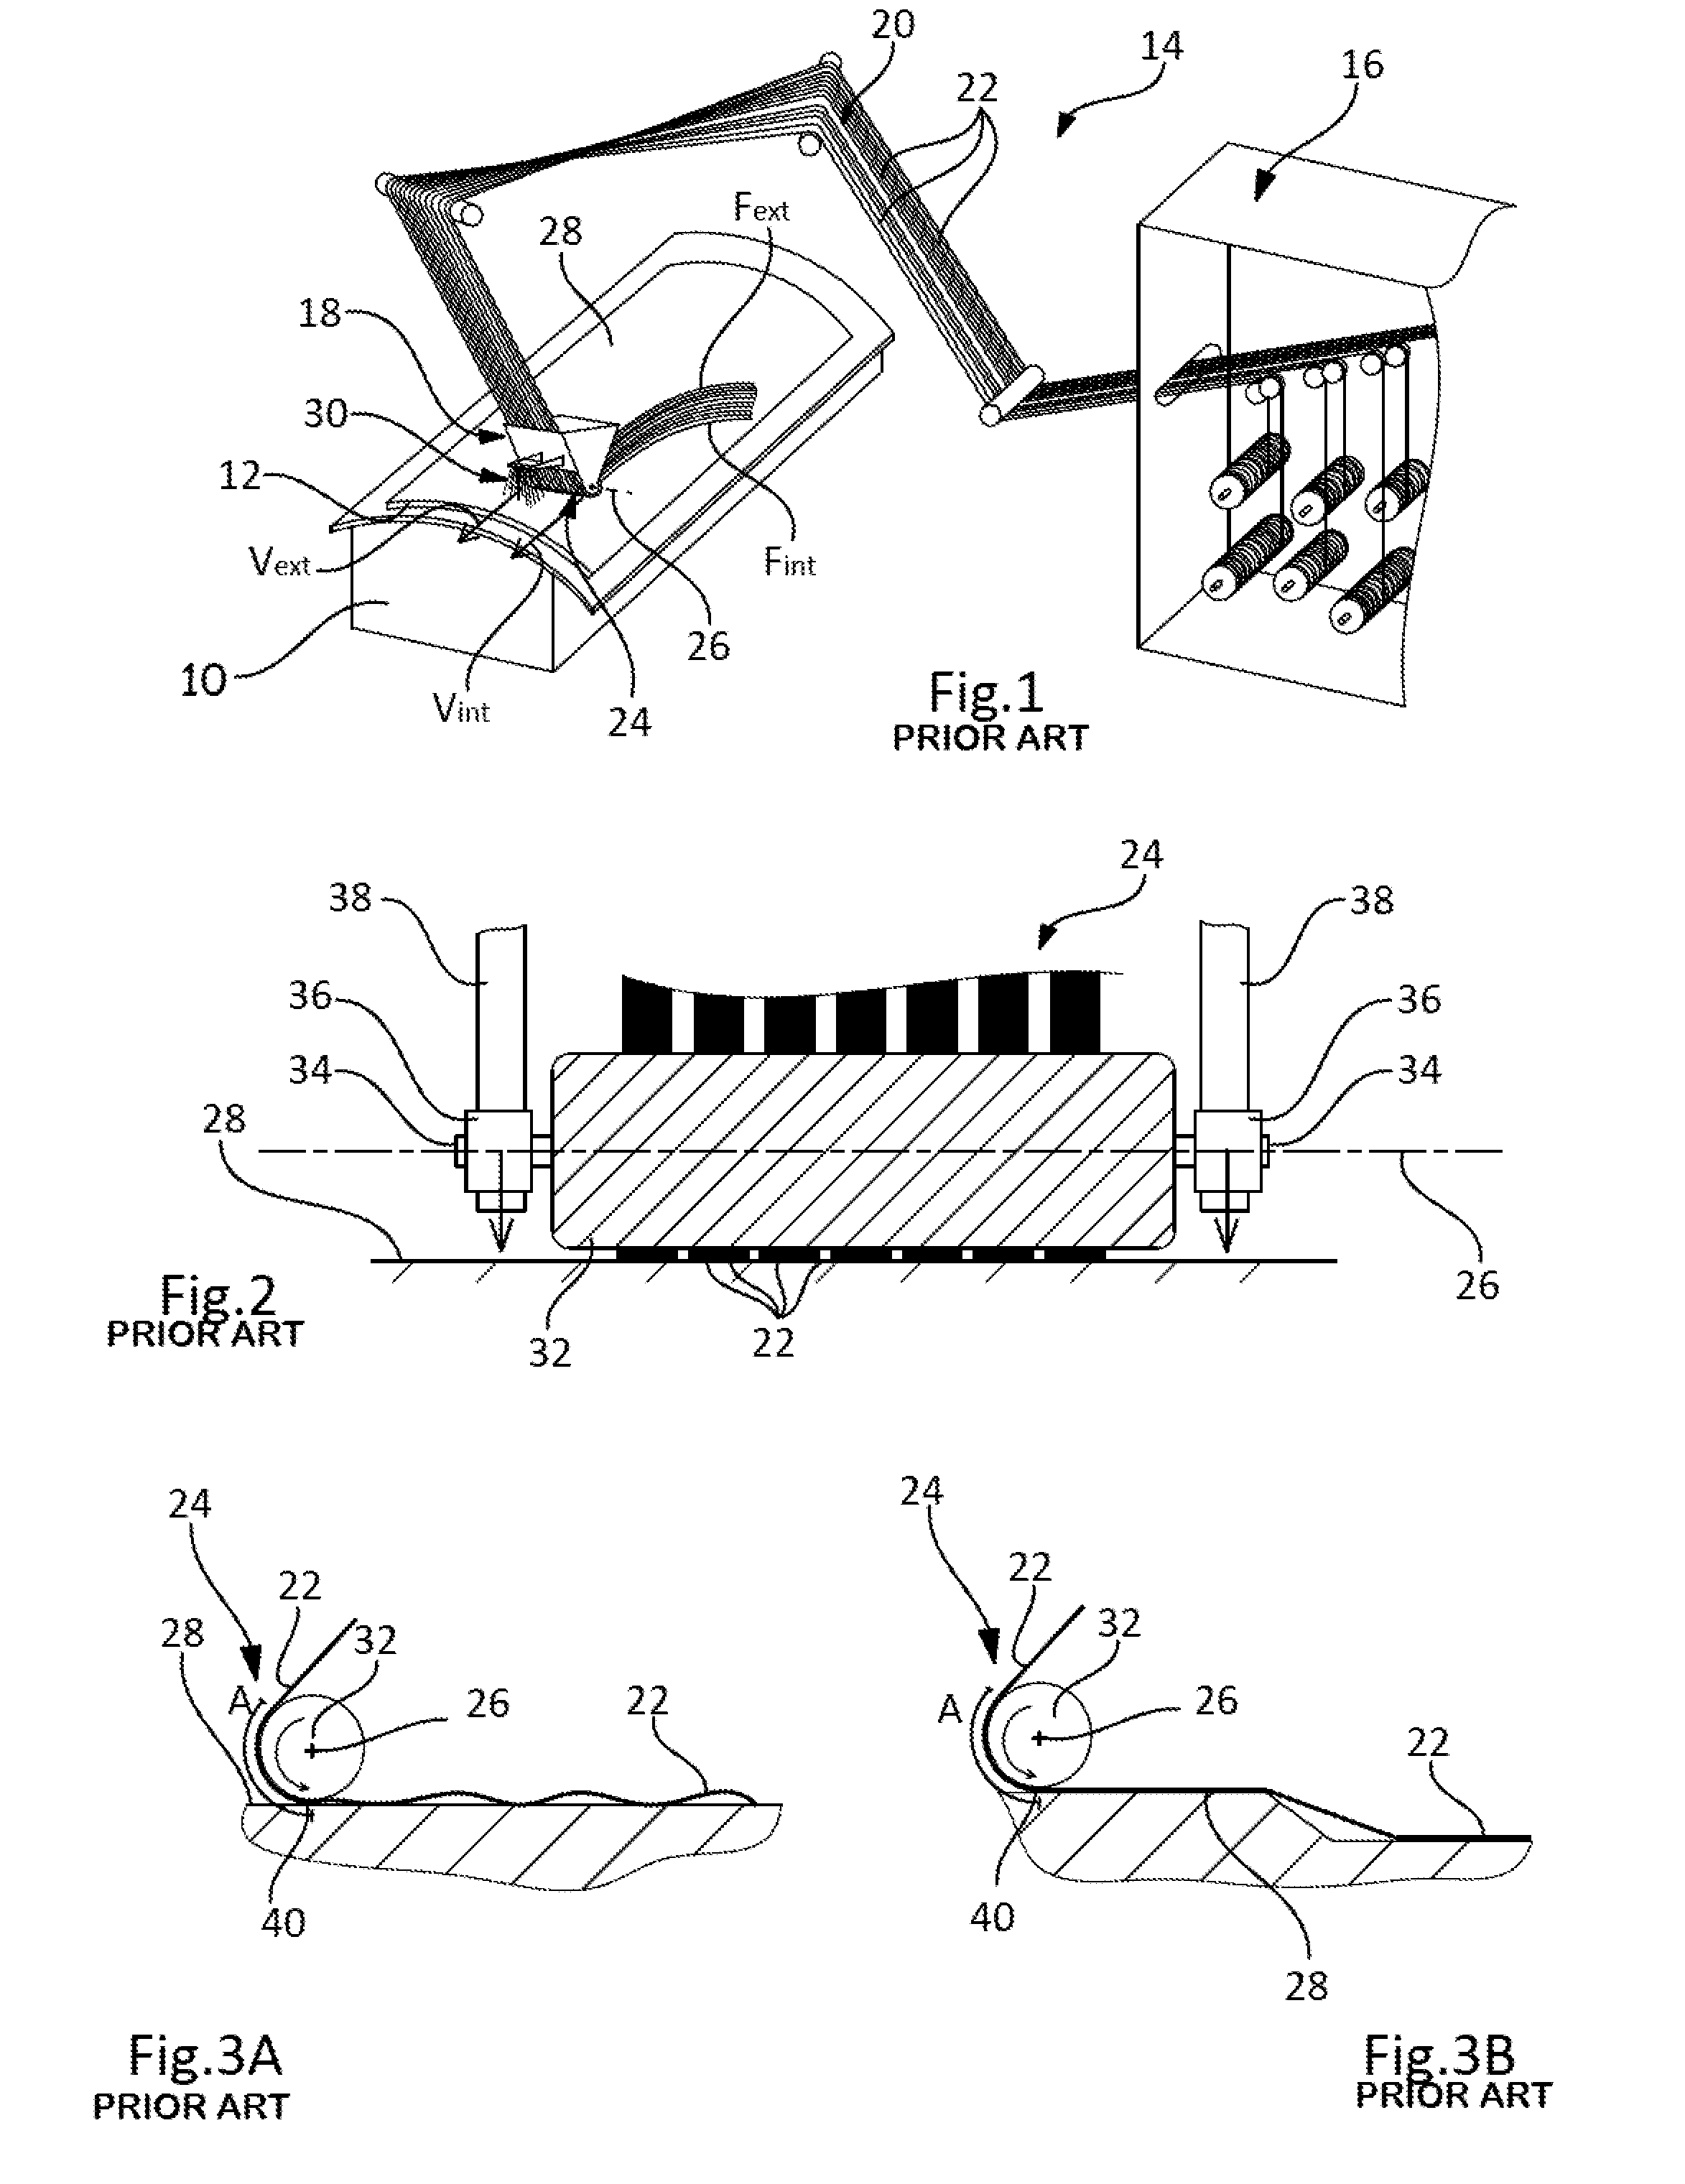 Fibre laying machine comprising a roller with pivoting rings